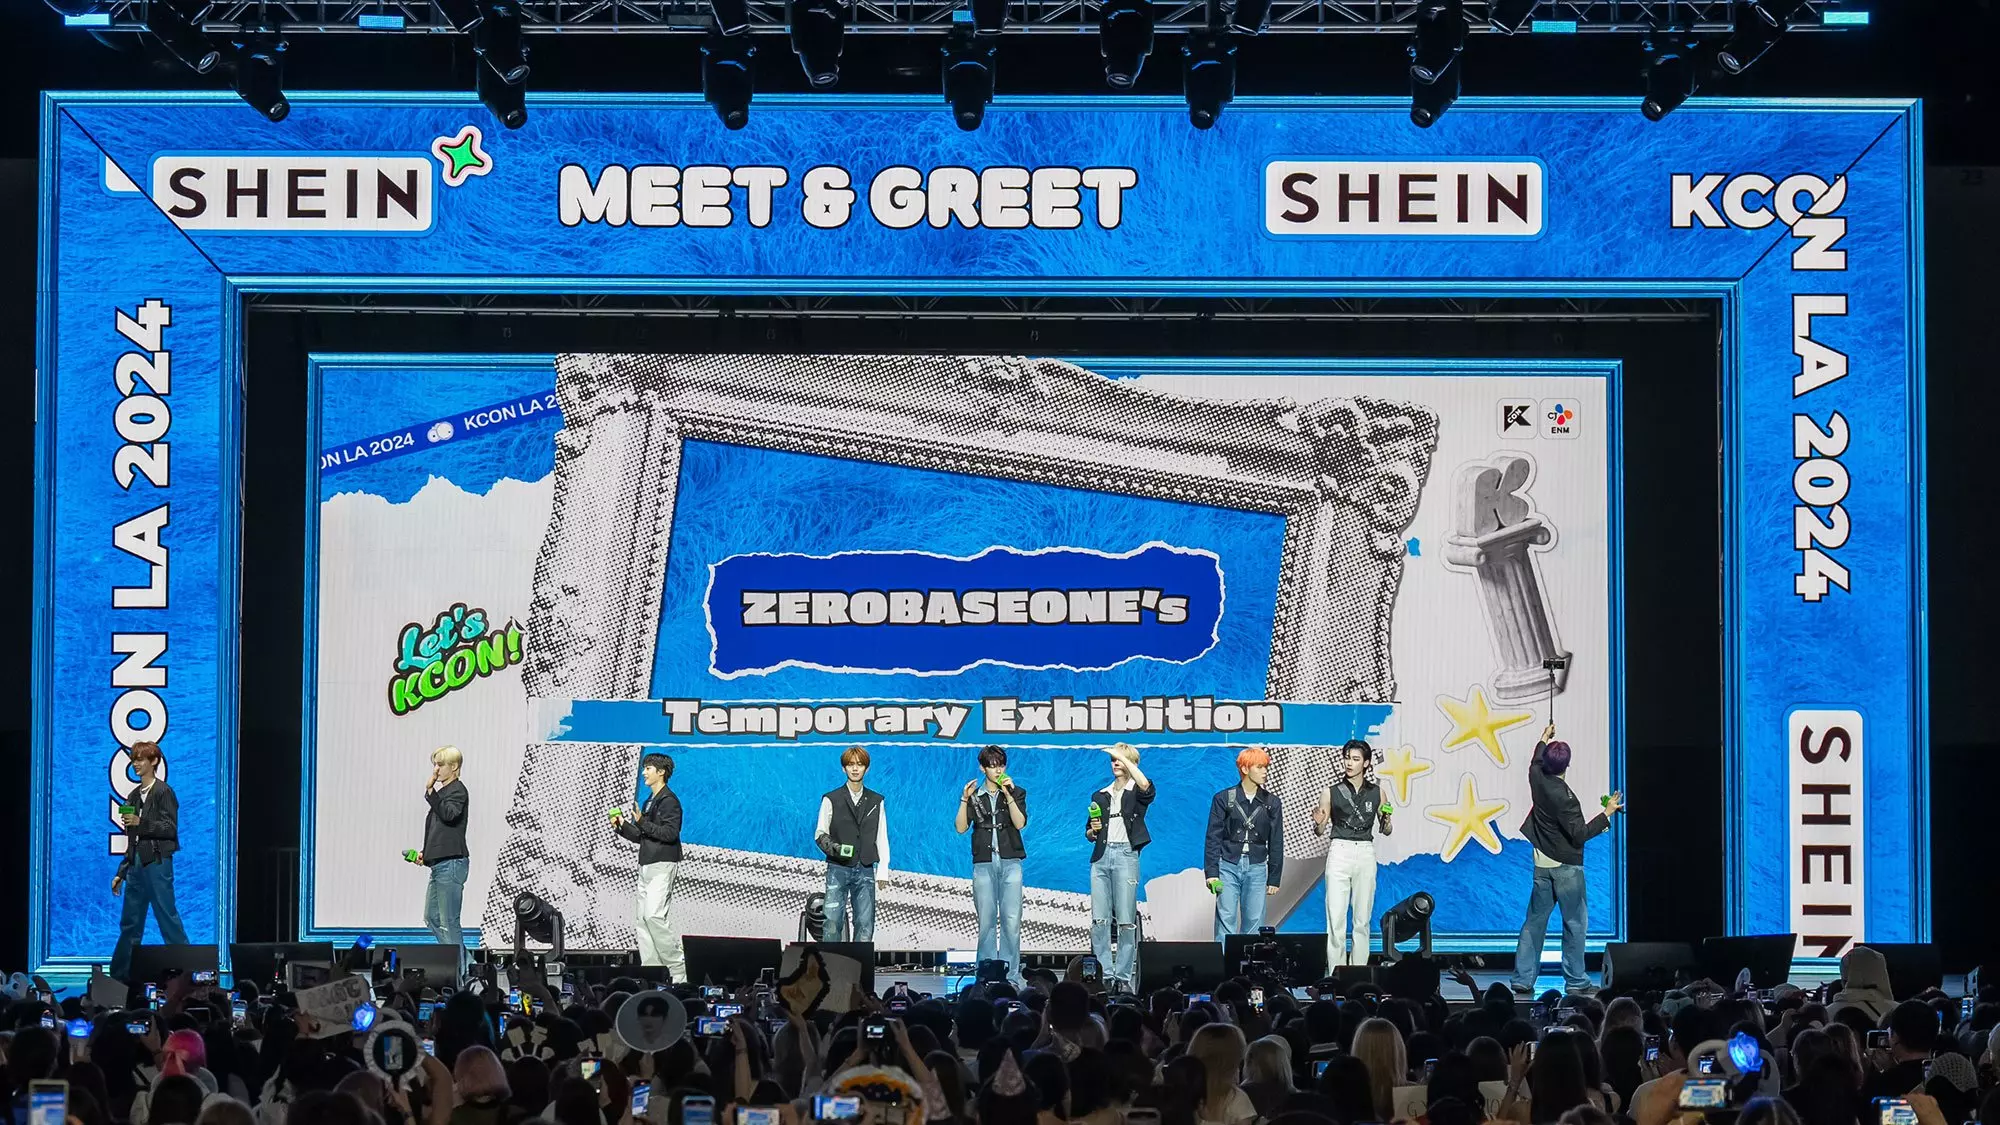 KCON LA 2024: 7 Highlights From NCT 127, ZEROBASEONE, NMIXX & More